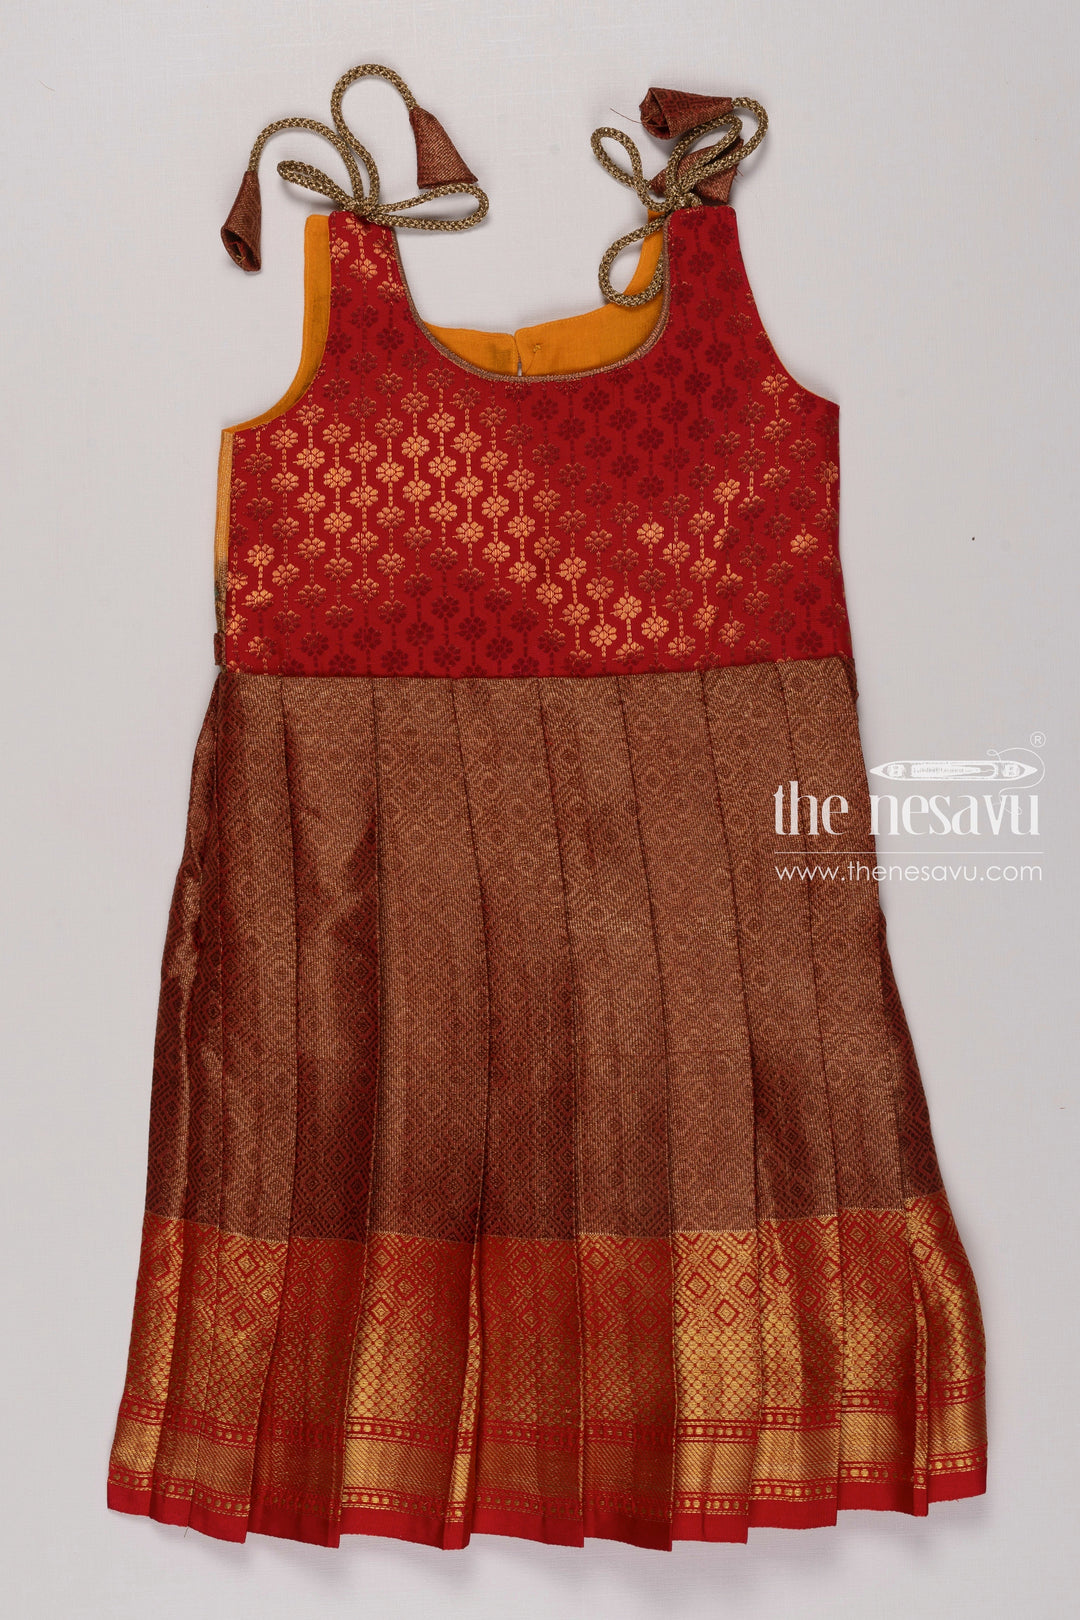 The Nesavu Tie-up Frock Rustic Brown and Sunset Red Silk TieUp Frock  Traditional Chic for Girls Nesavu 16 (1Y) / Brown / Silk T273E-16 Girls Rustic Brown Red Silk Frock | Adjustable Tie Up Design | The Nesavu